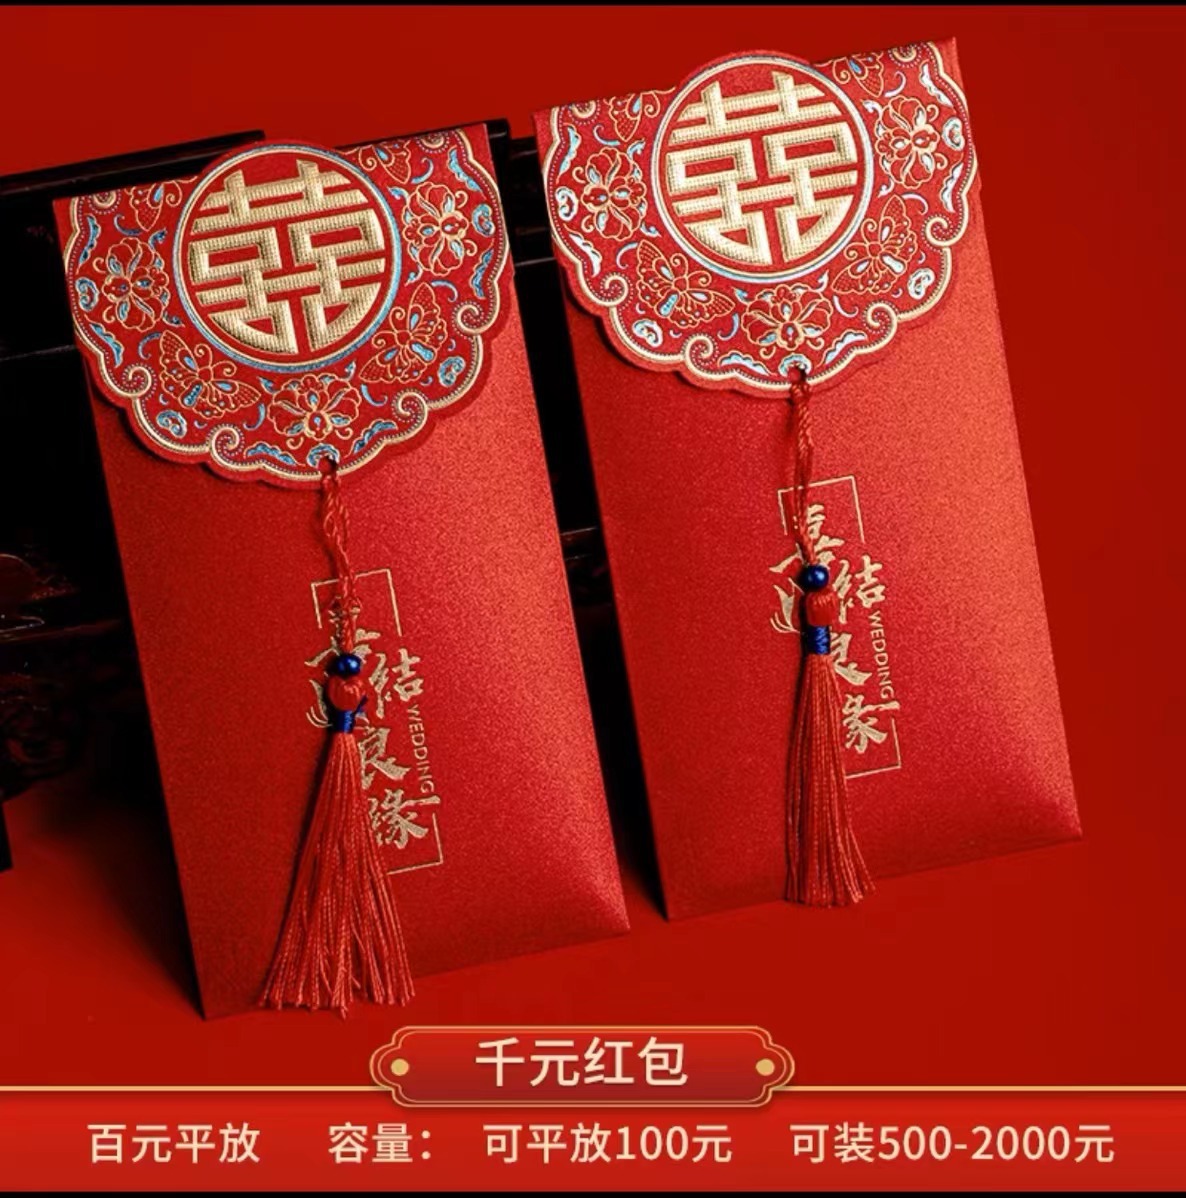 New Wedding Chinese Character Xi Chinese Red Envelope Li Wei Seal Wedding Door Blocking Wedding Supplies Collection Large Tassel Red Pocket for Lucky Money